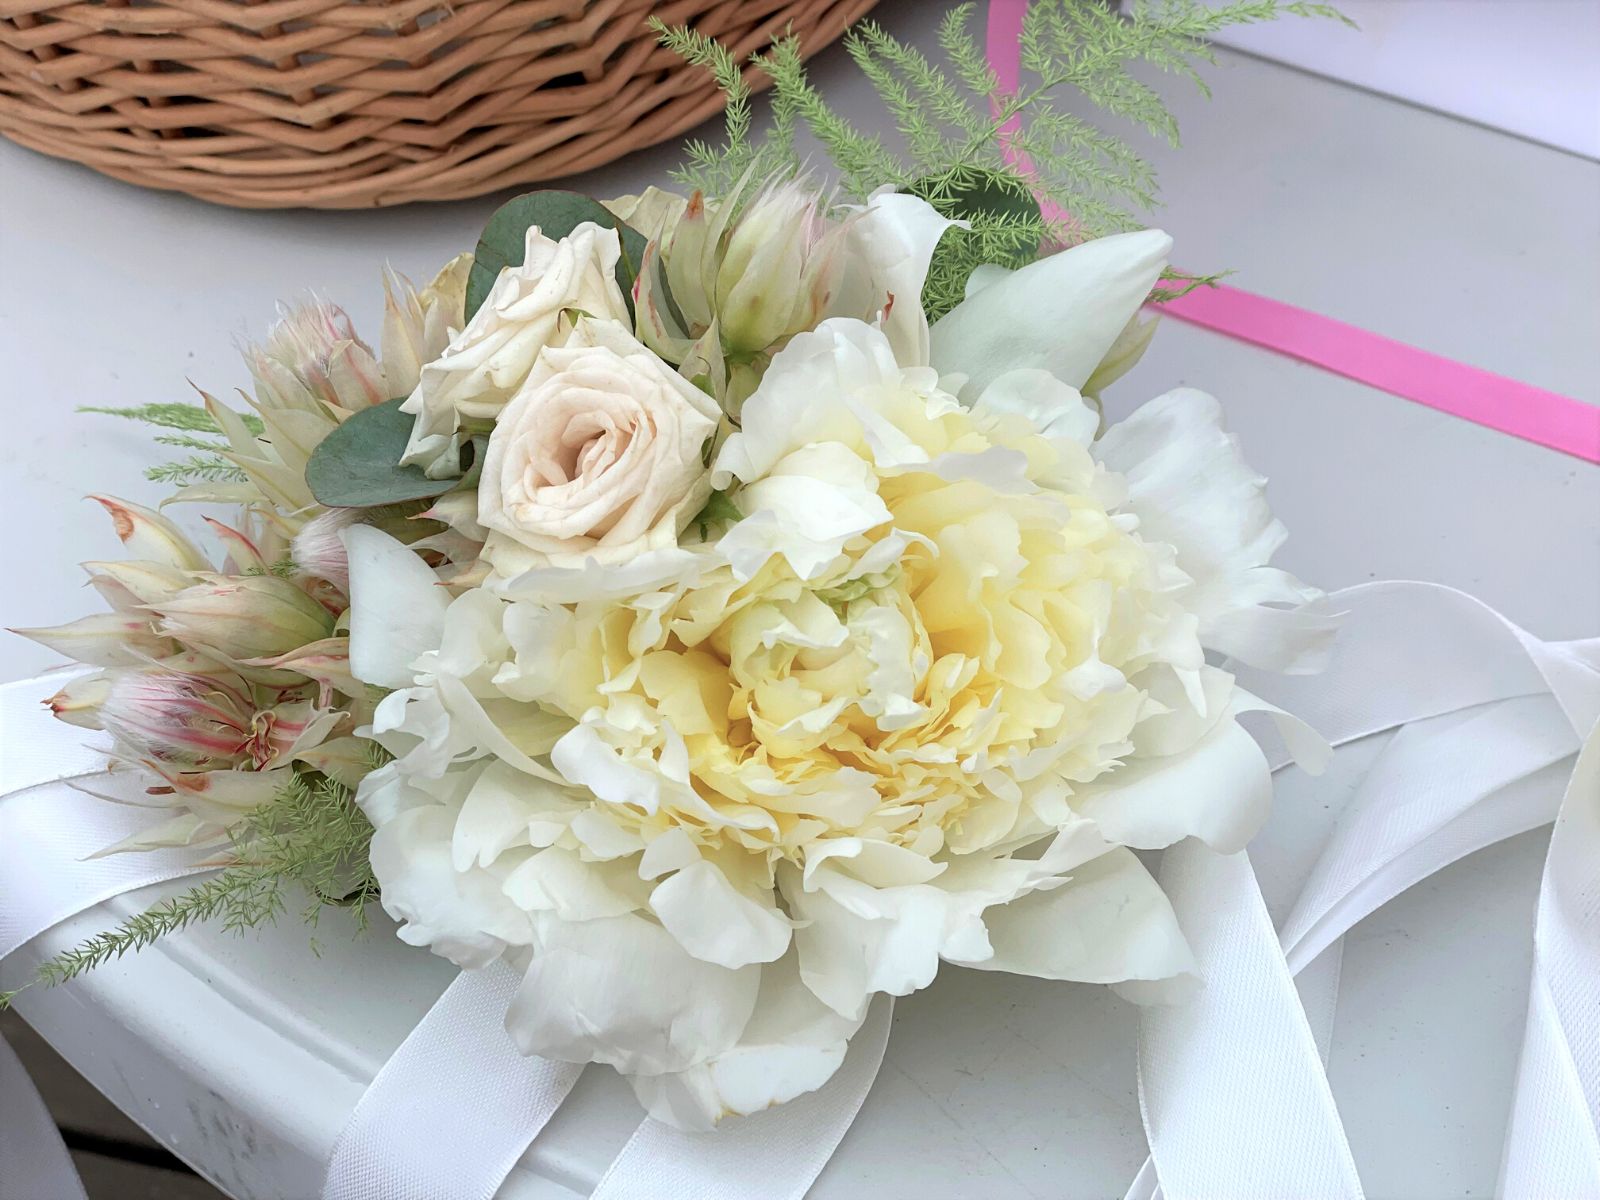 Protea Blushing Bride Sprayroses and White Peonies in a Bracelet Blog by Kristina Rimiene on Thursd